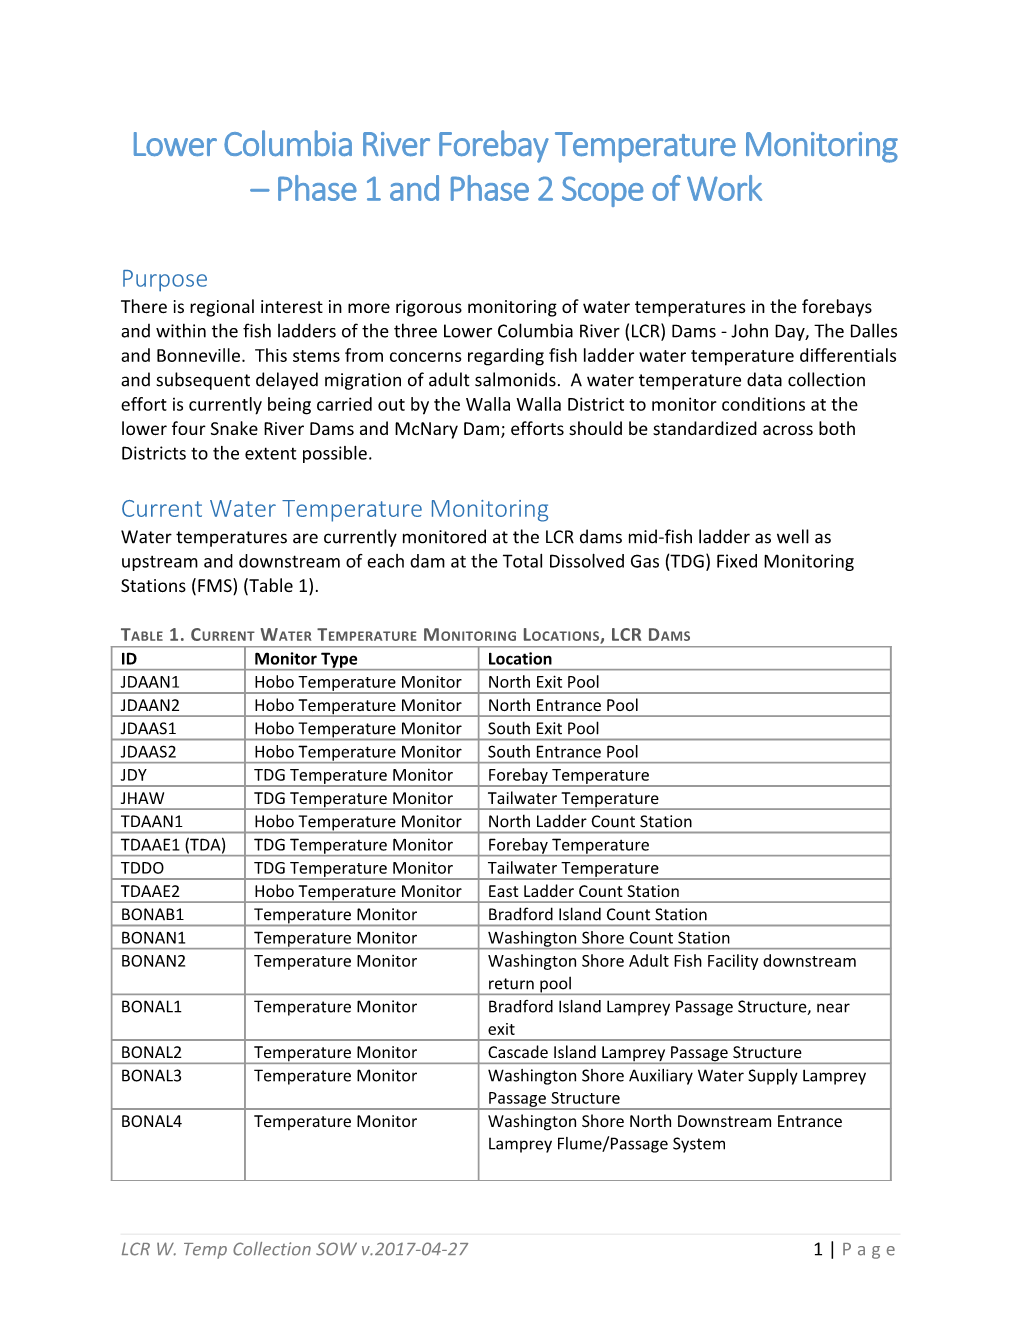 Lower Columbia River Forebay Temperature Monitoring Phase 1 and Phase 2Scope of Work